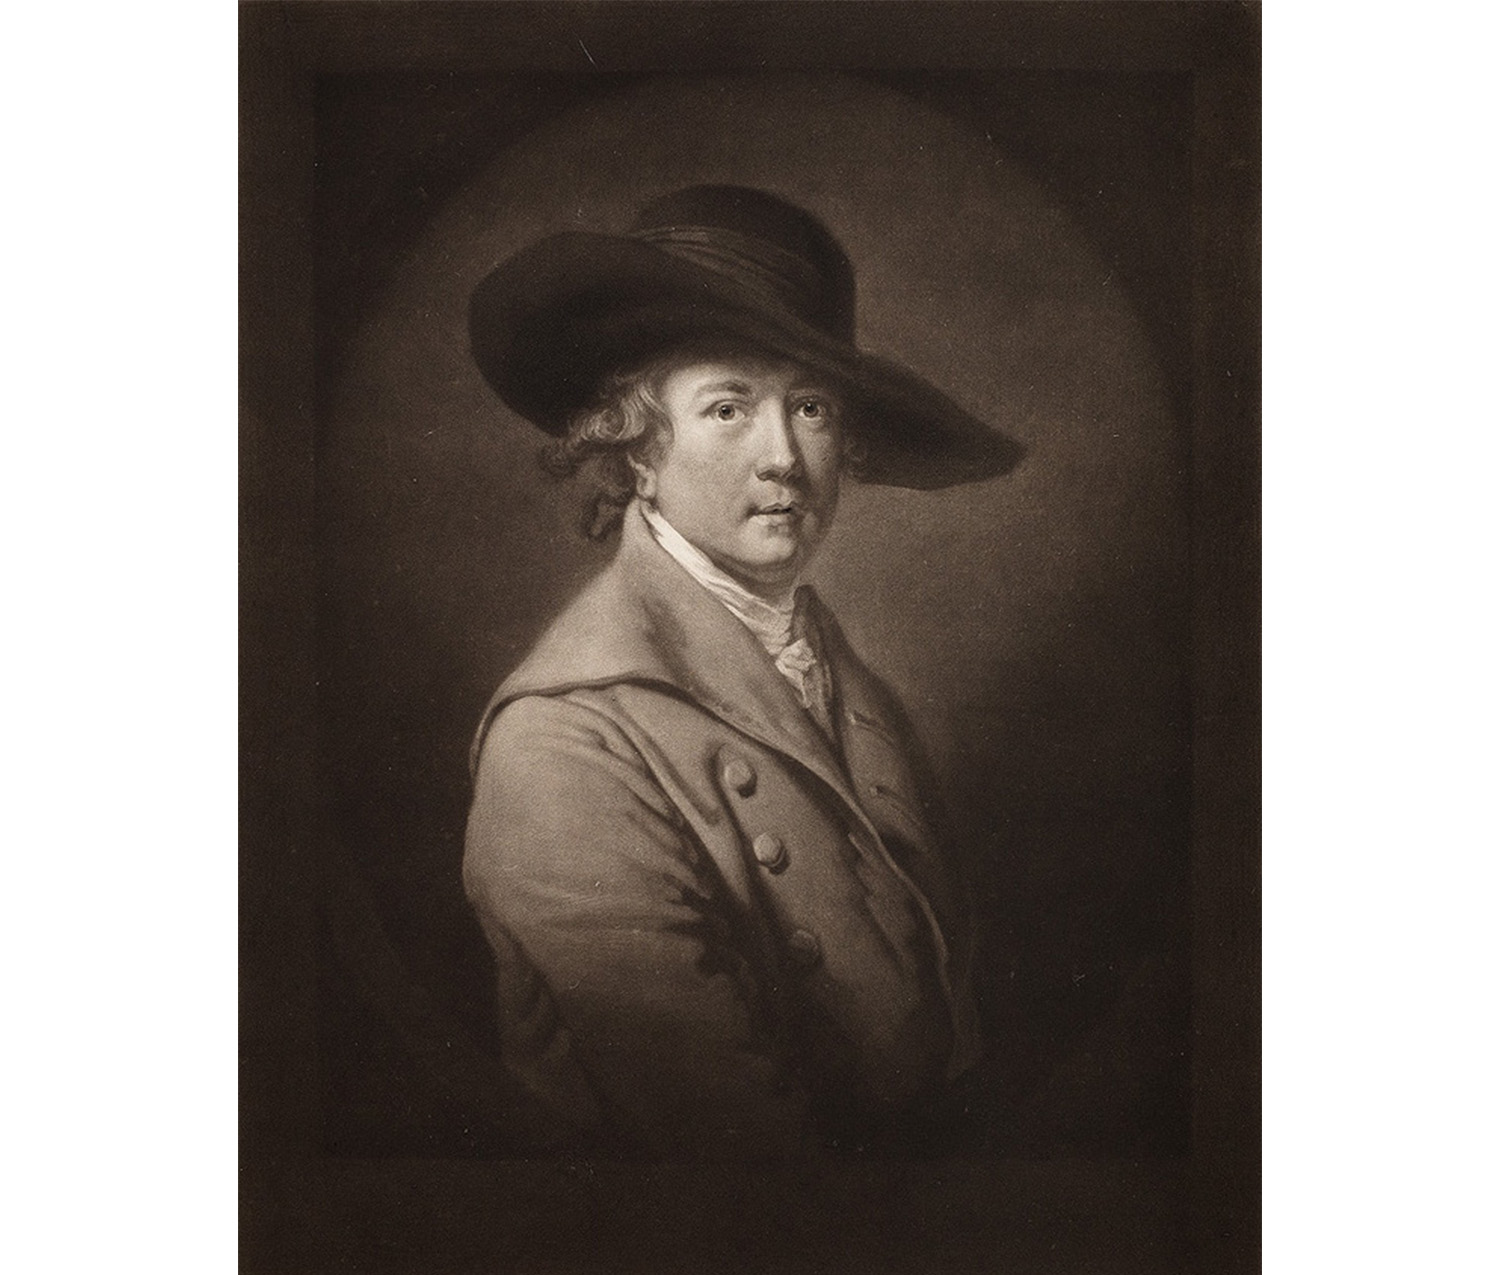 black and white bust portrait of a man wearing a double-breasted jacket and a black hat